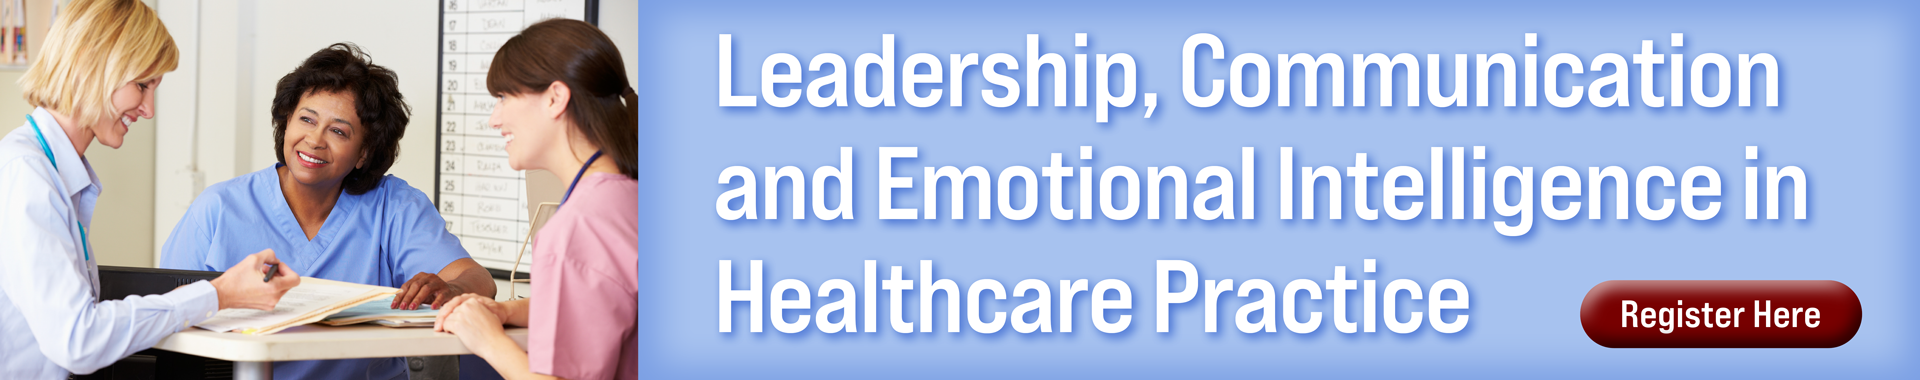 Leadership, Communication and Emotional Intelligence in Healthcare Practice